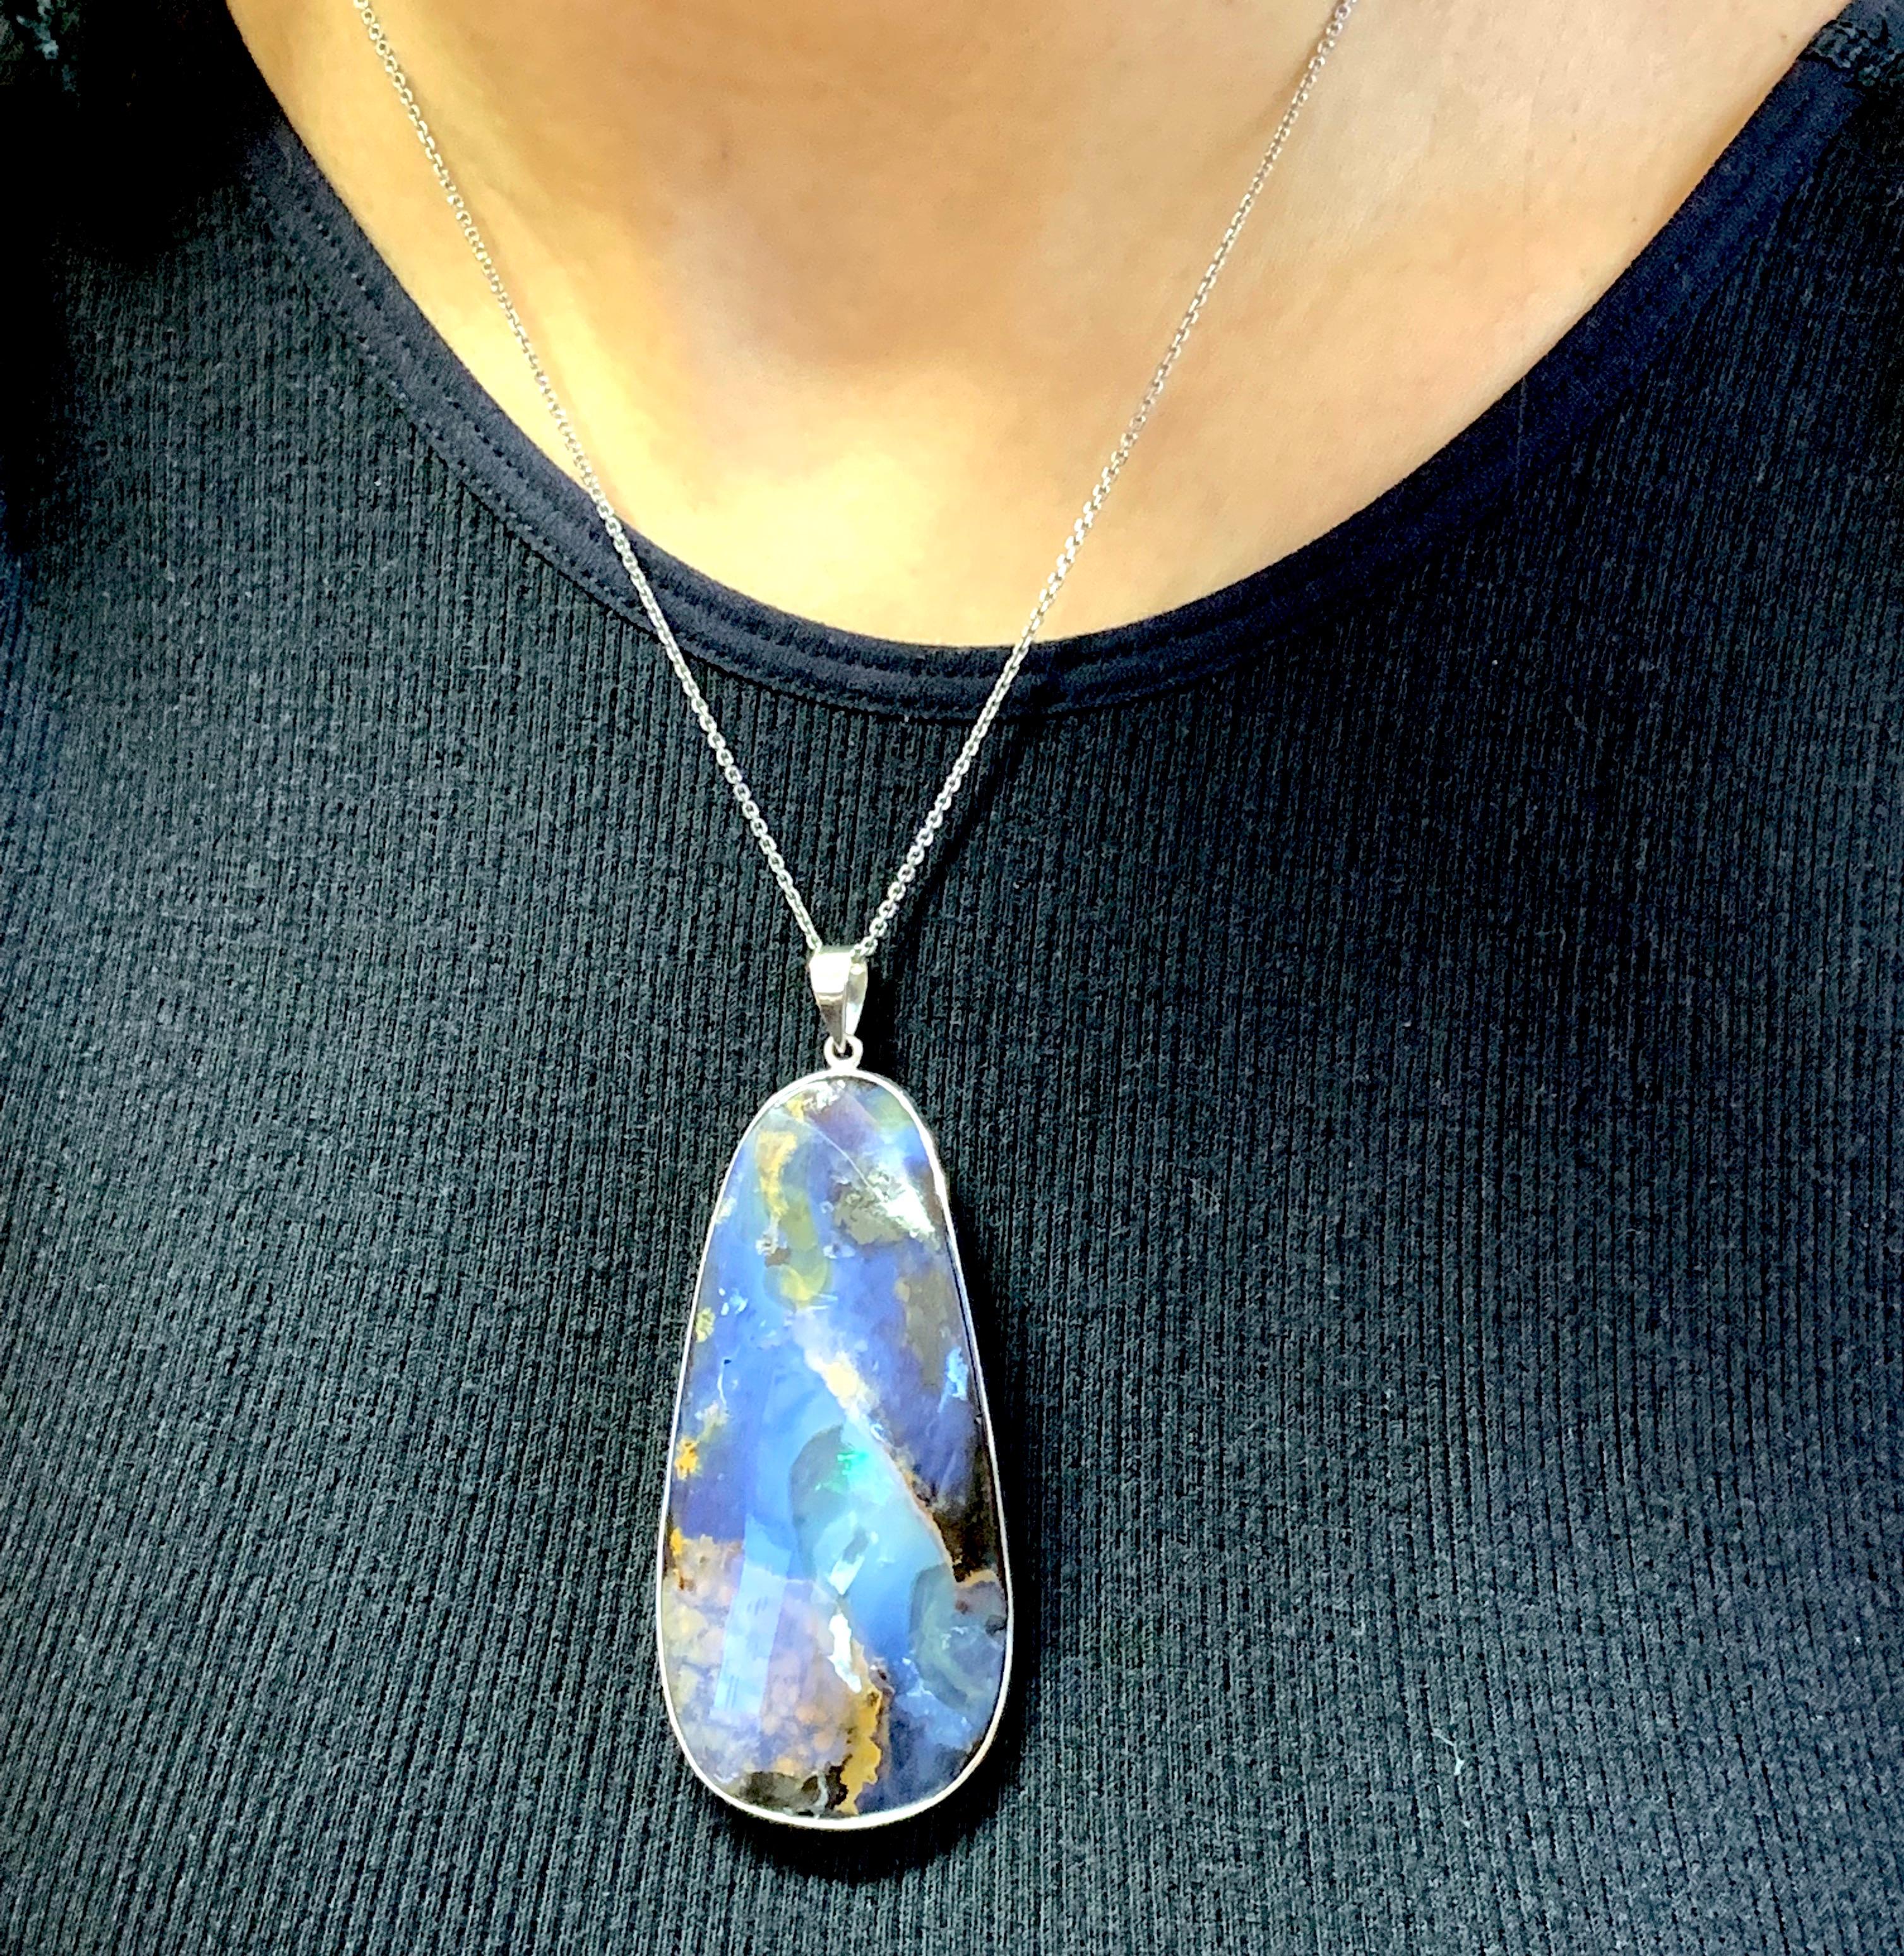 A unique piece, this Opal is a true showstopper! 

Material: Silver
Center Stone Details: 1 Opal - Measuring 65 x 30 mm

Fine one-of-a-kind craftsmanship meets incredible quality in this breathtaking piece of jewelry.